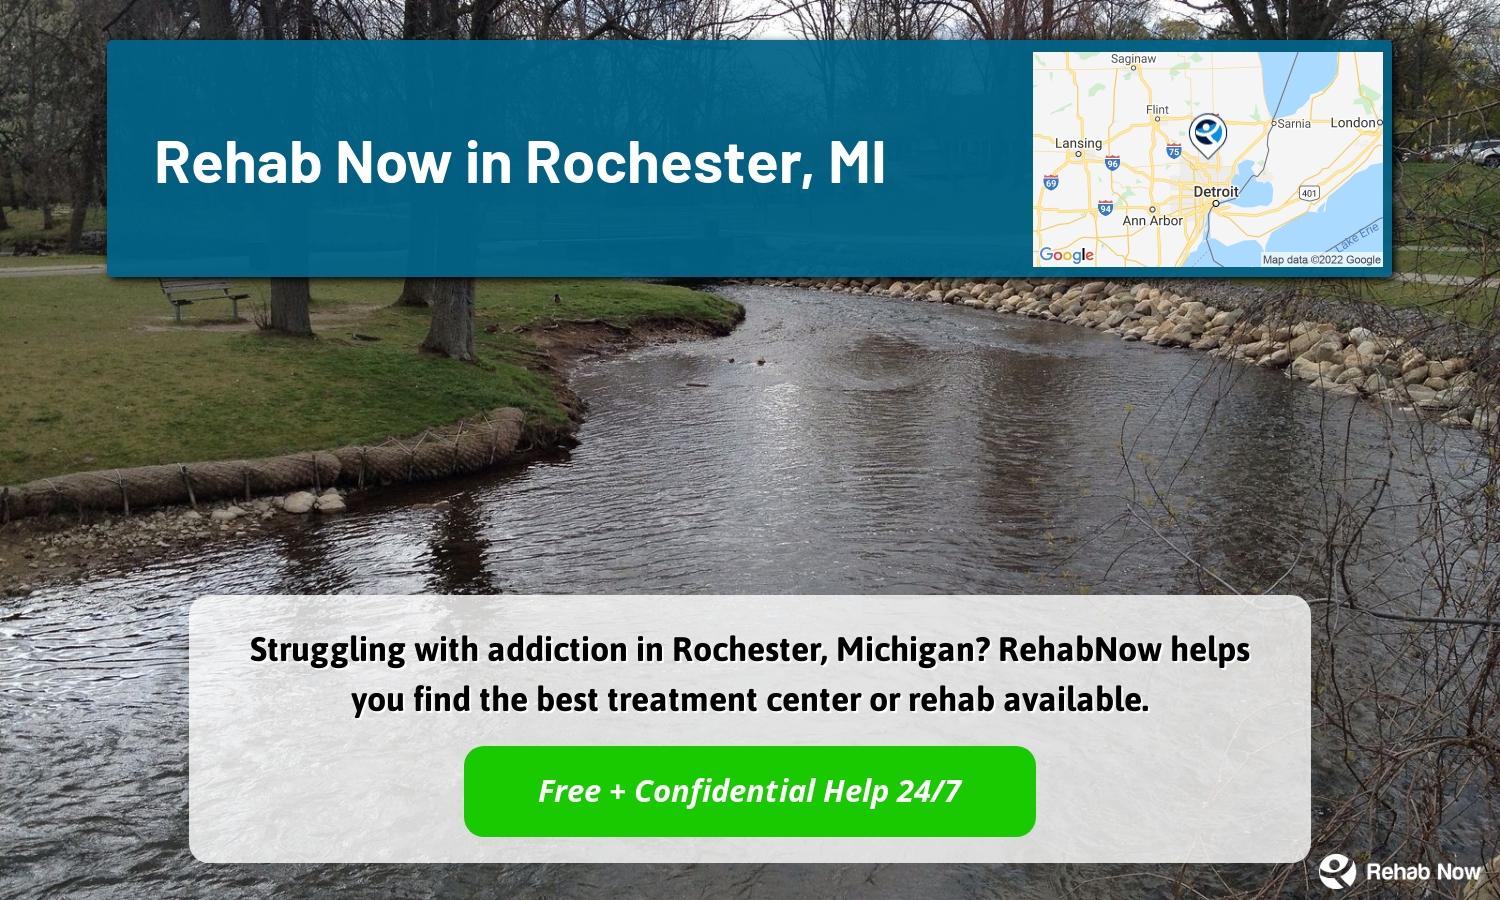 Struggling with addiction in Rochester, Michigan? RehabNow helps you find the best treatment center or rehab available.